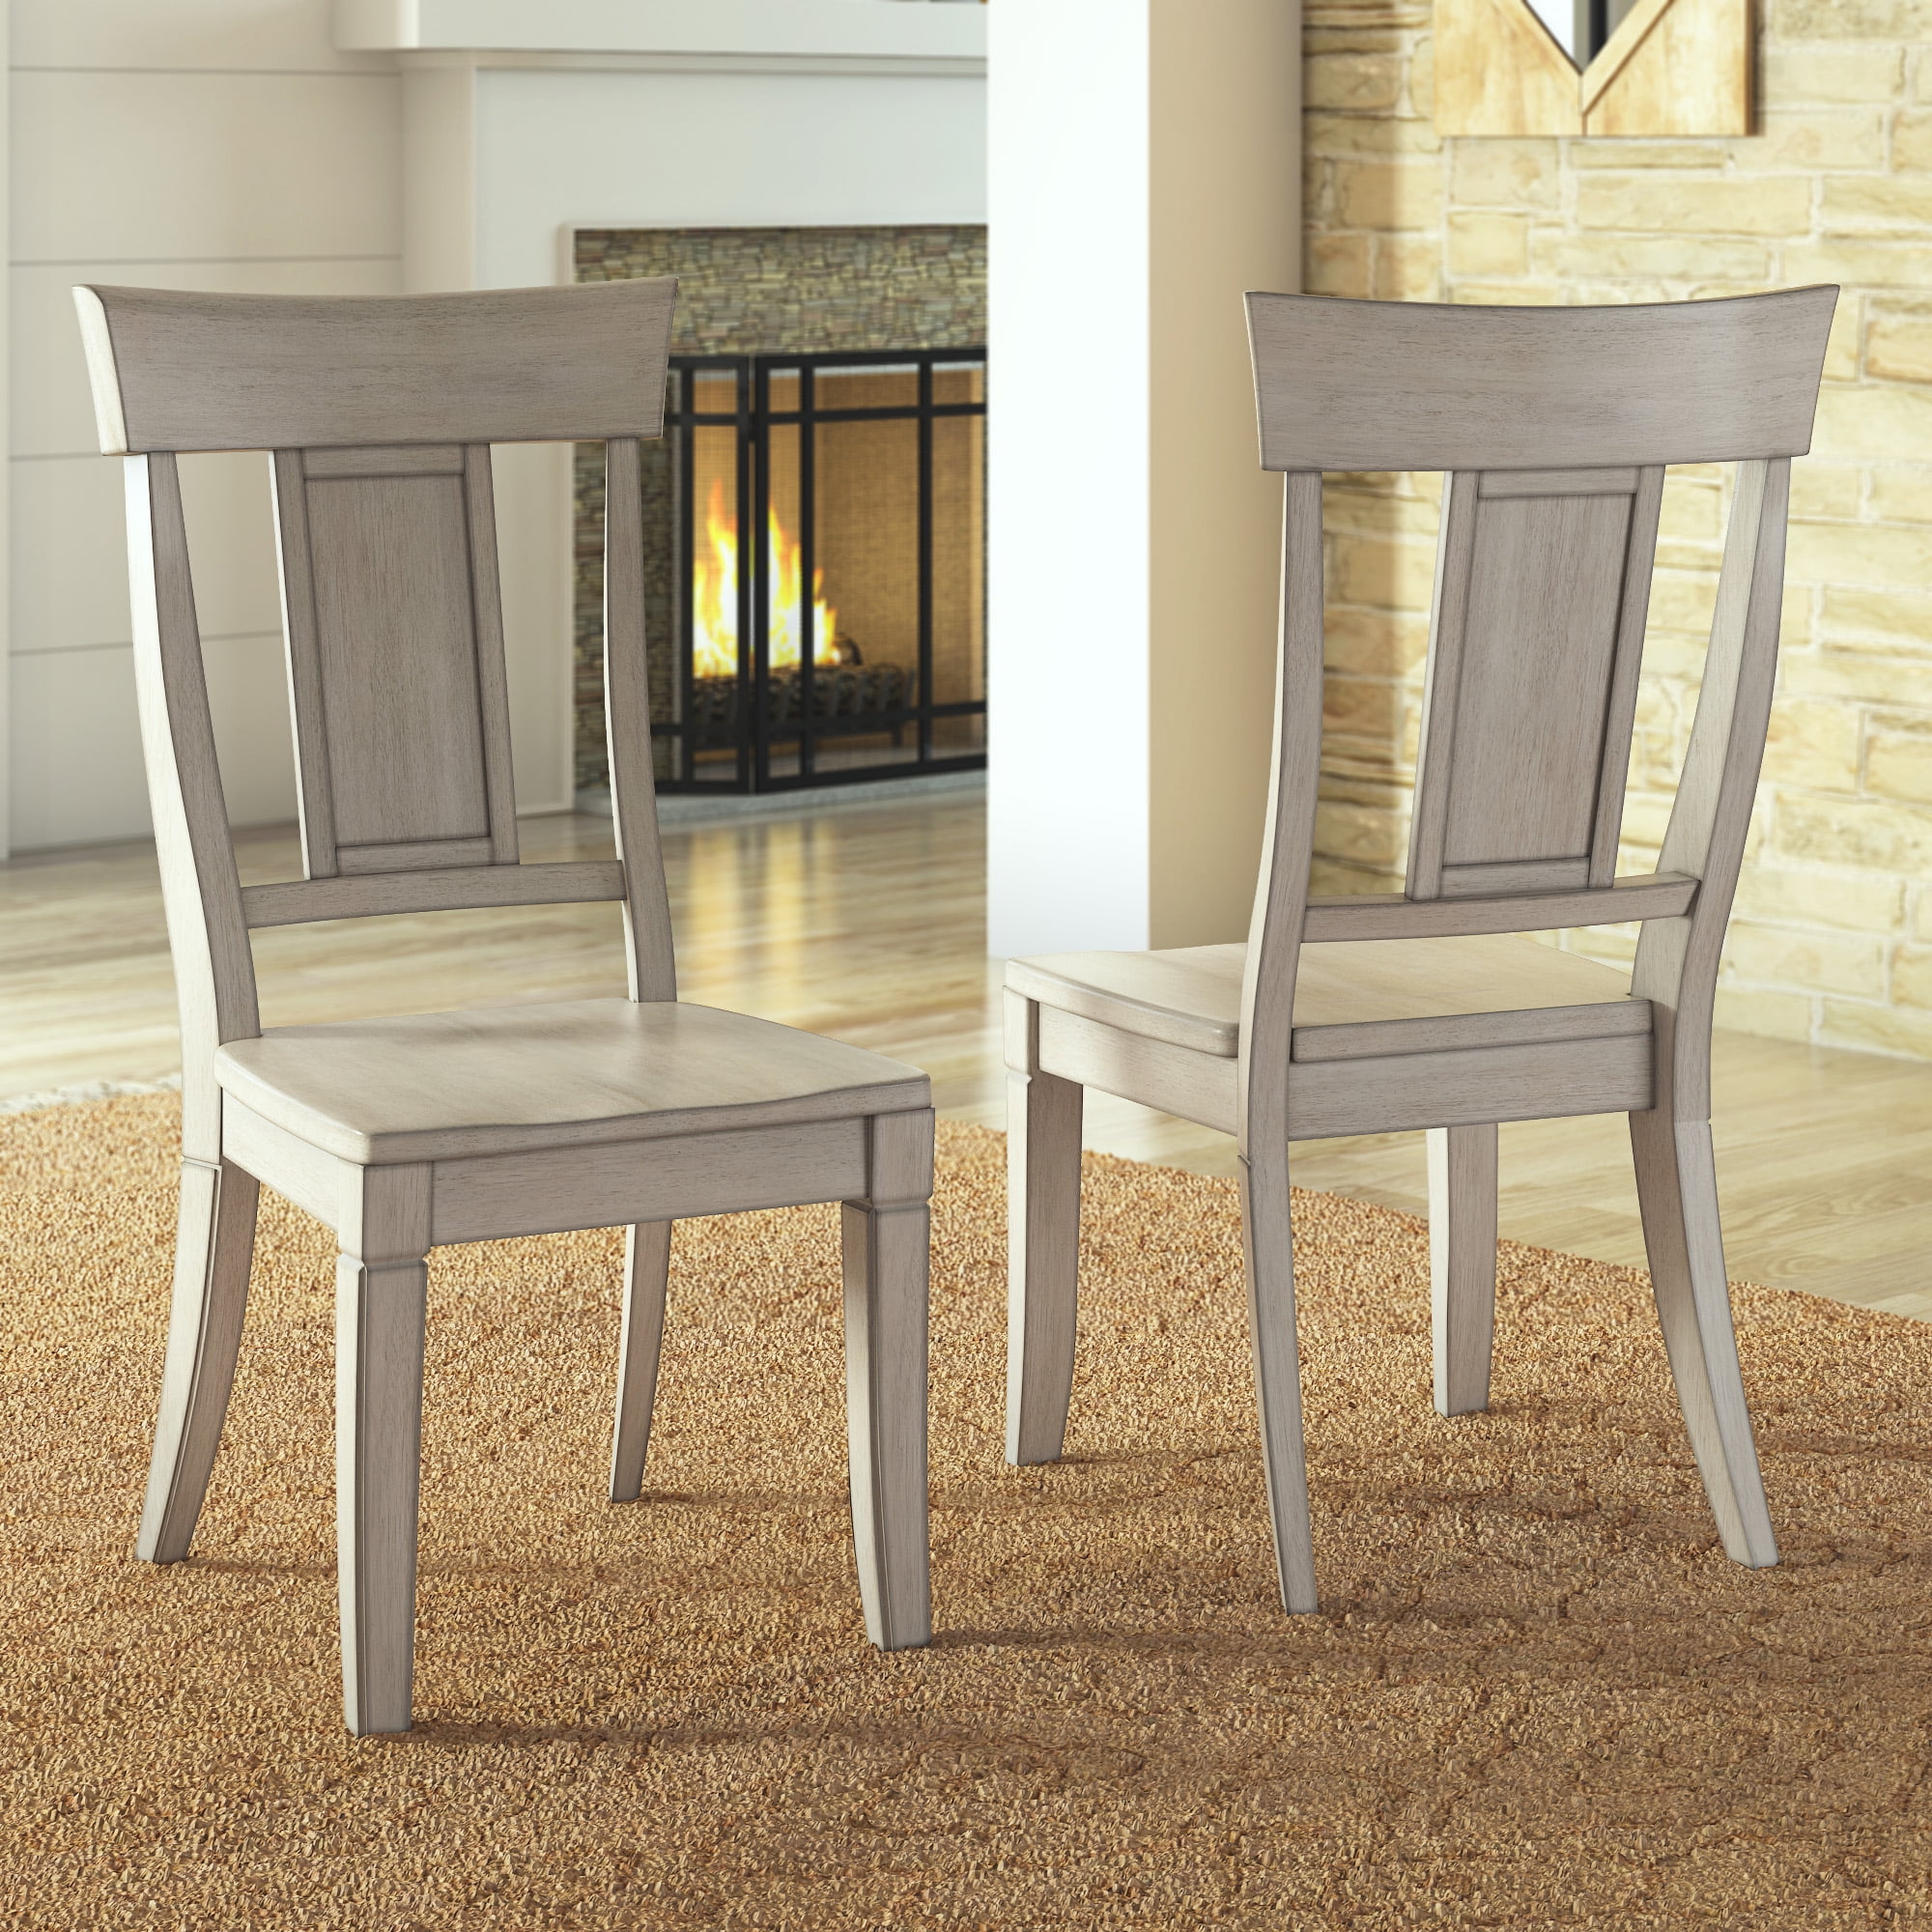 Weston Home Farmhouse Wood Dining Chair with Panel Back, Set of 2 ...